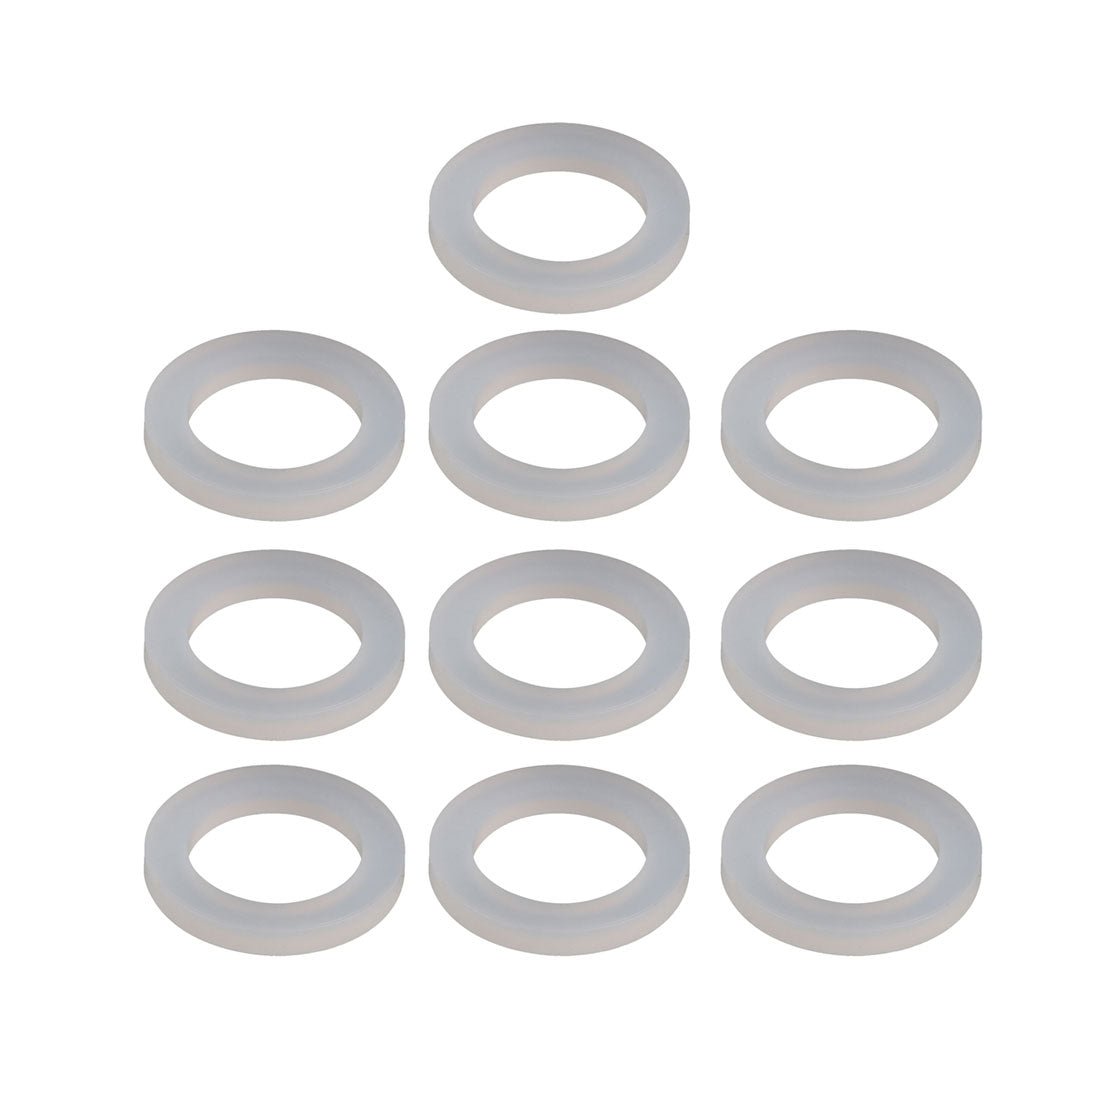 Uxcell Uxcell 10pcs Clear Silicone Round Flat Washer Assortment Size 16x24x3mm Flat Washer